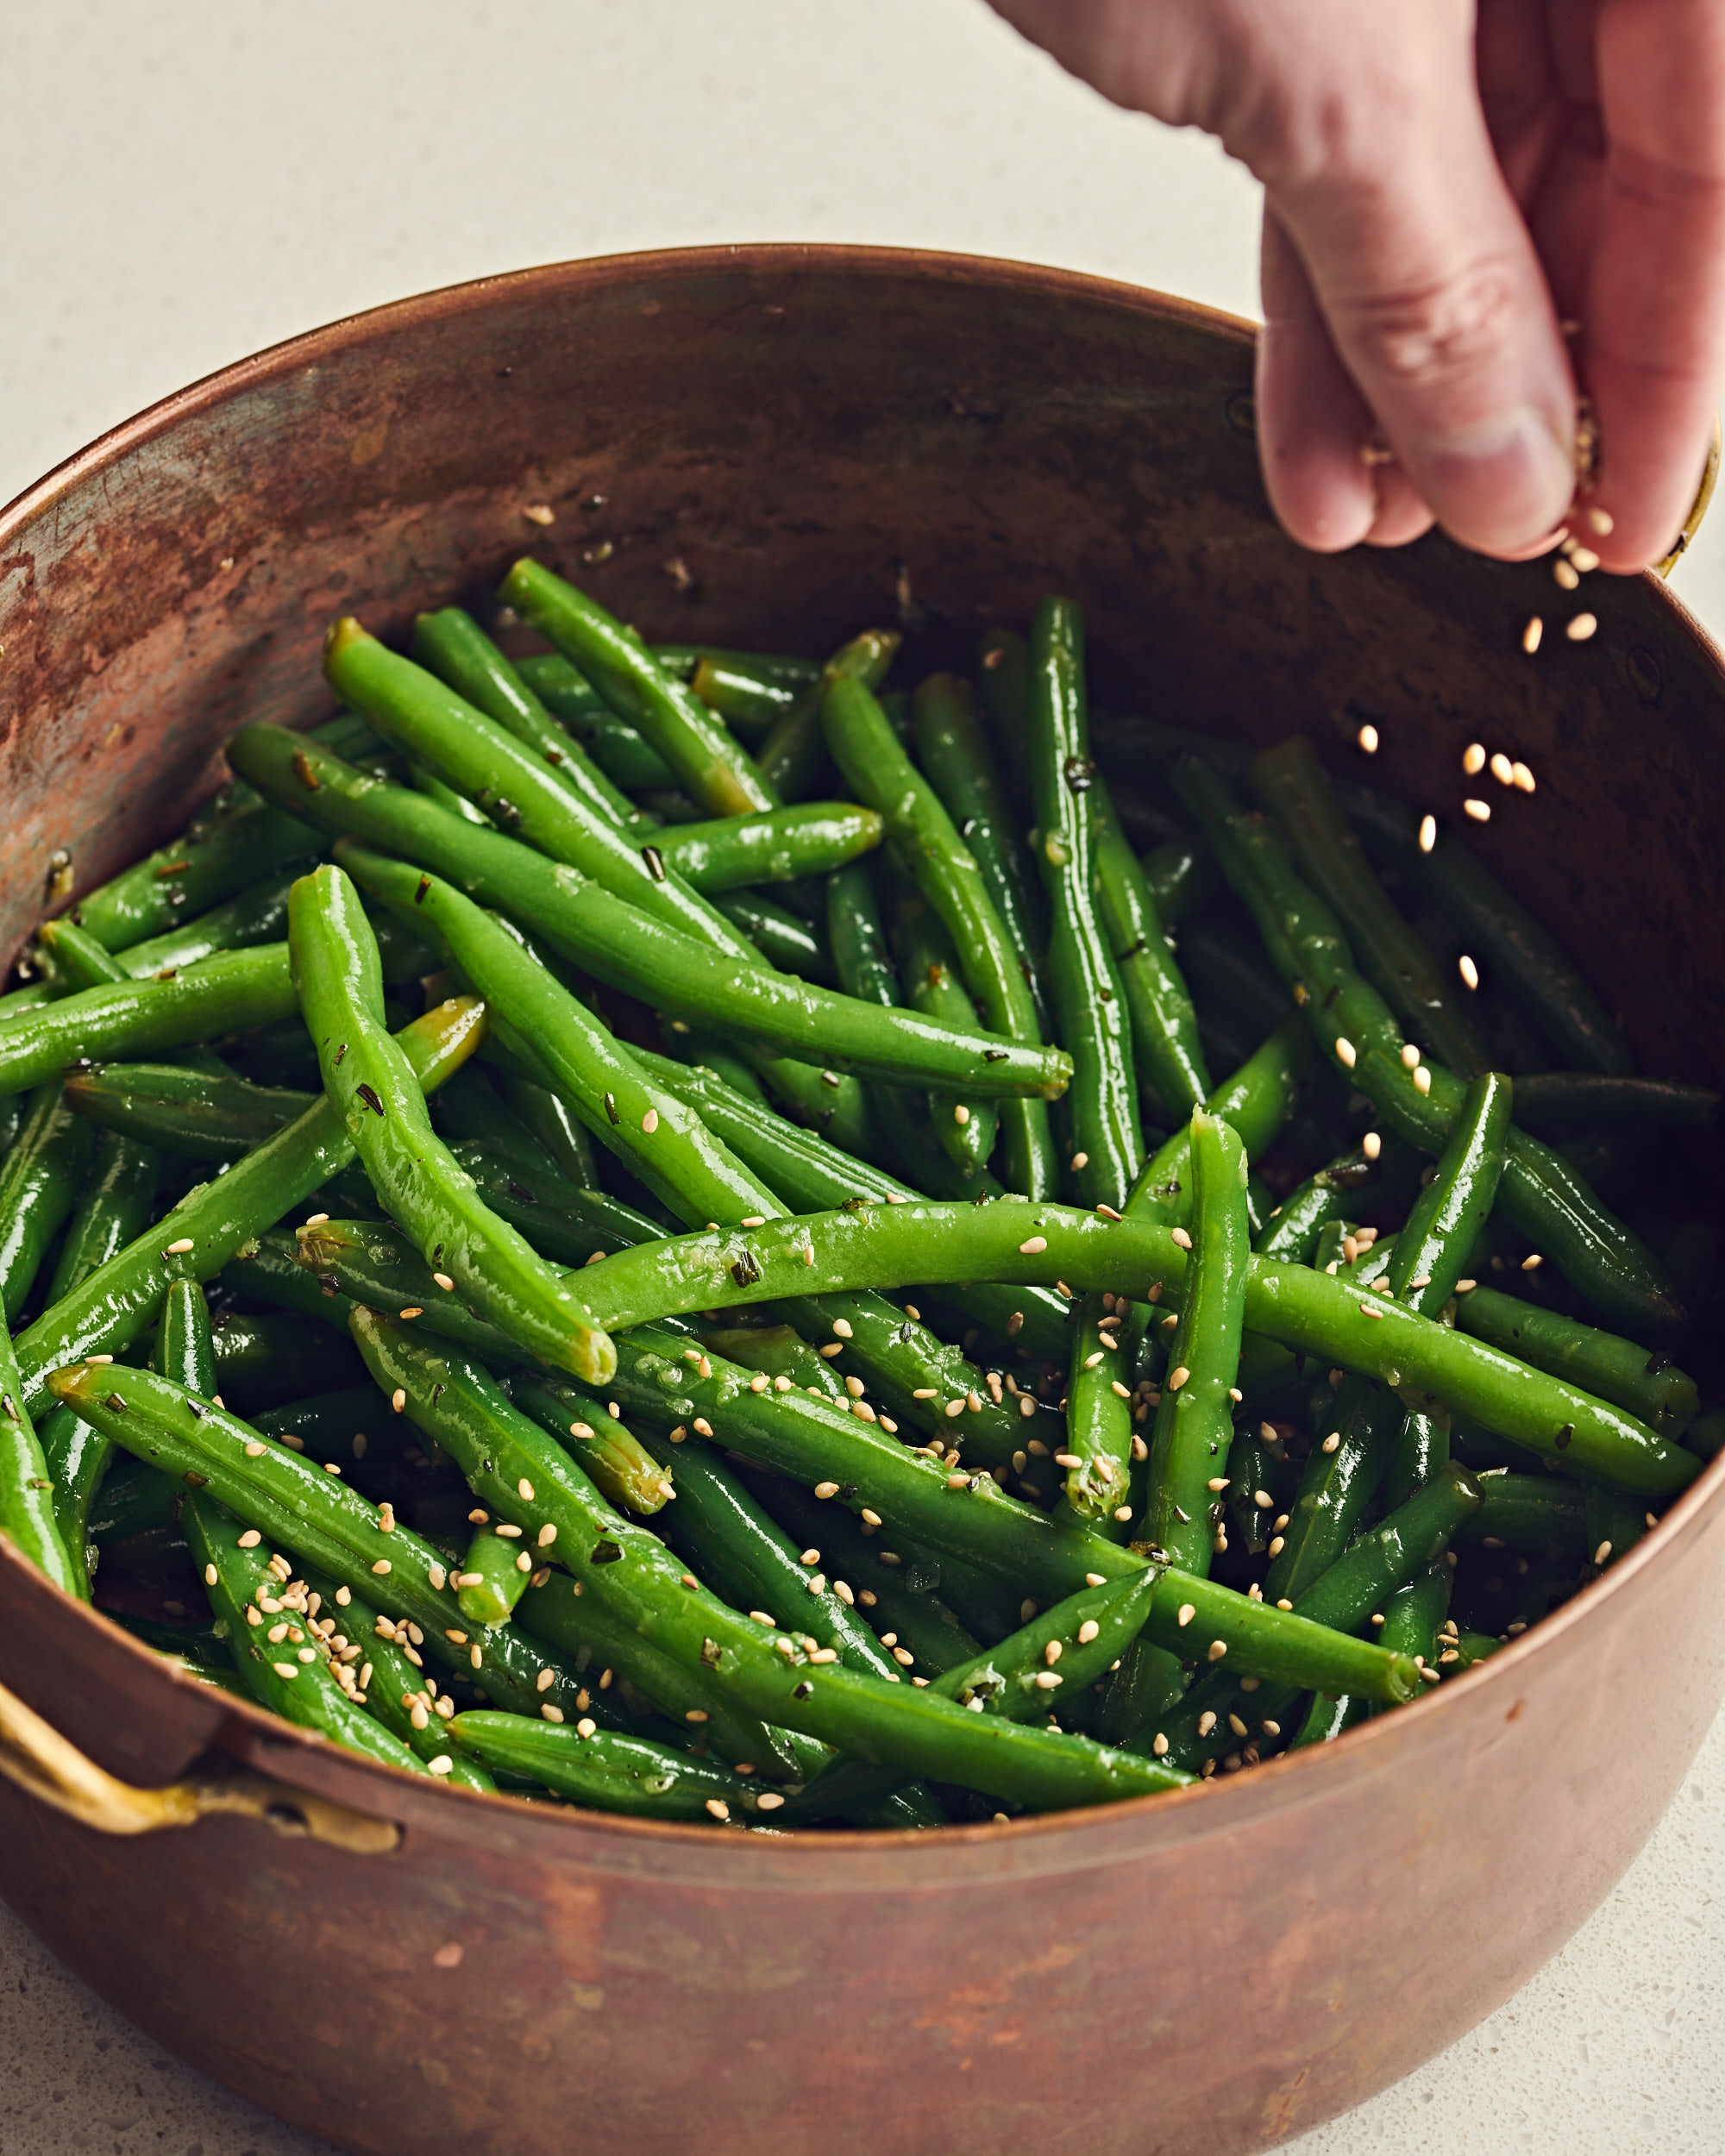 Sauteed_Green_Beans_Toasted_Charleston_Benne_Seeds